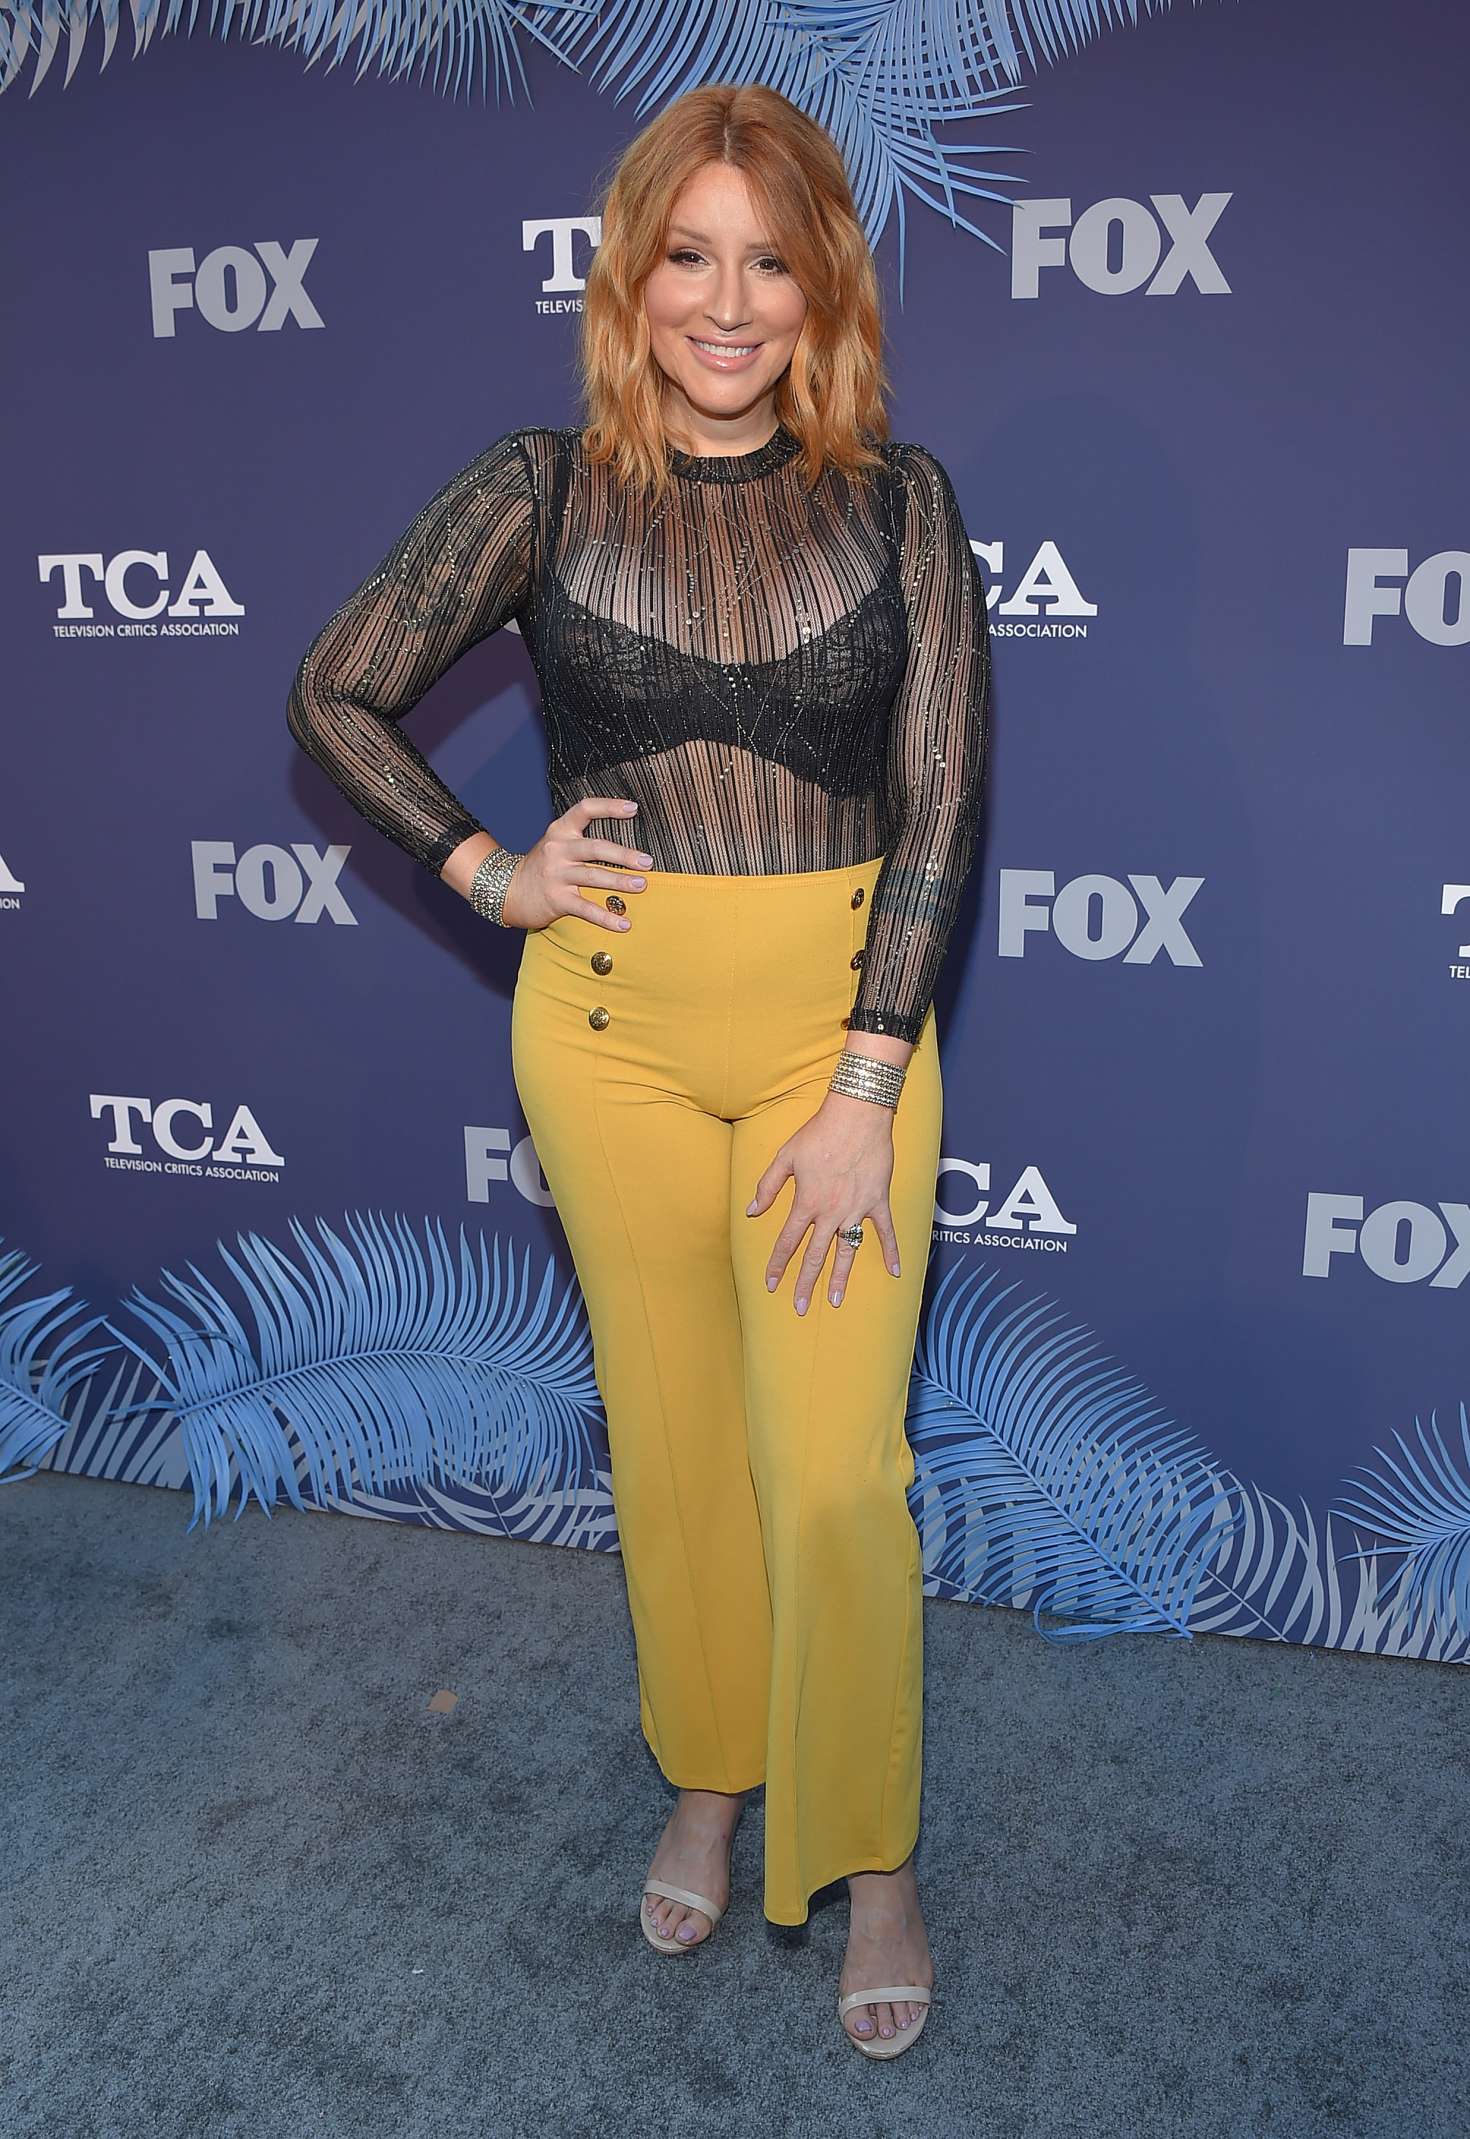 Our Lady J â€“ 2018 FOX Summer TCA 2018 All-Star Party in LA